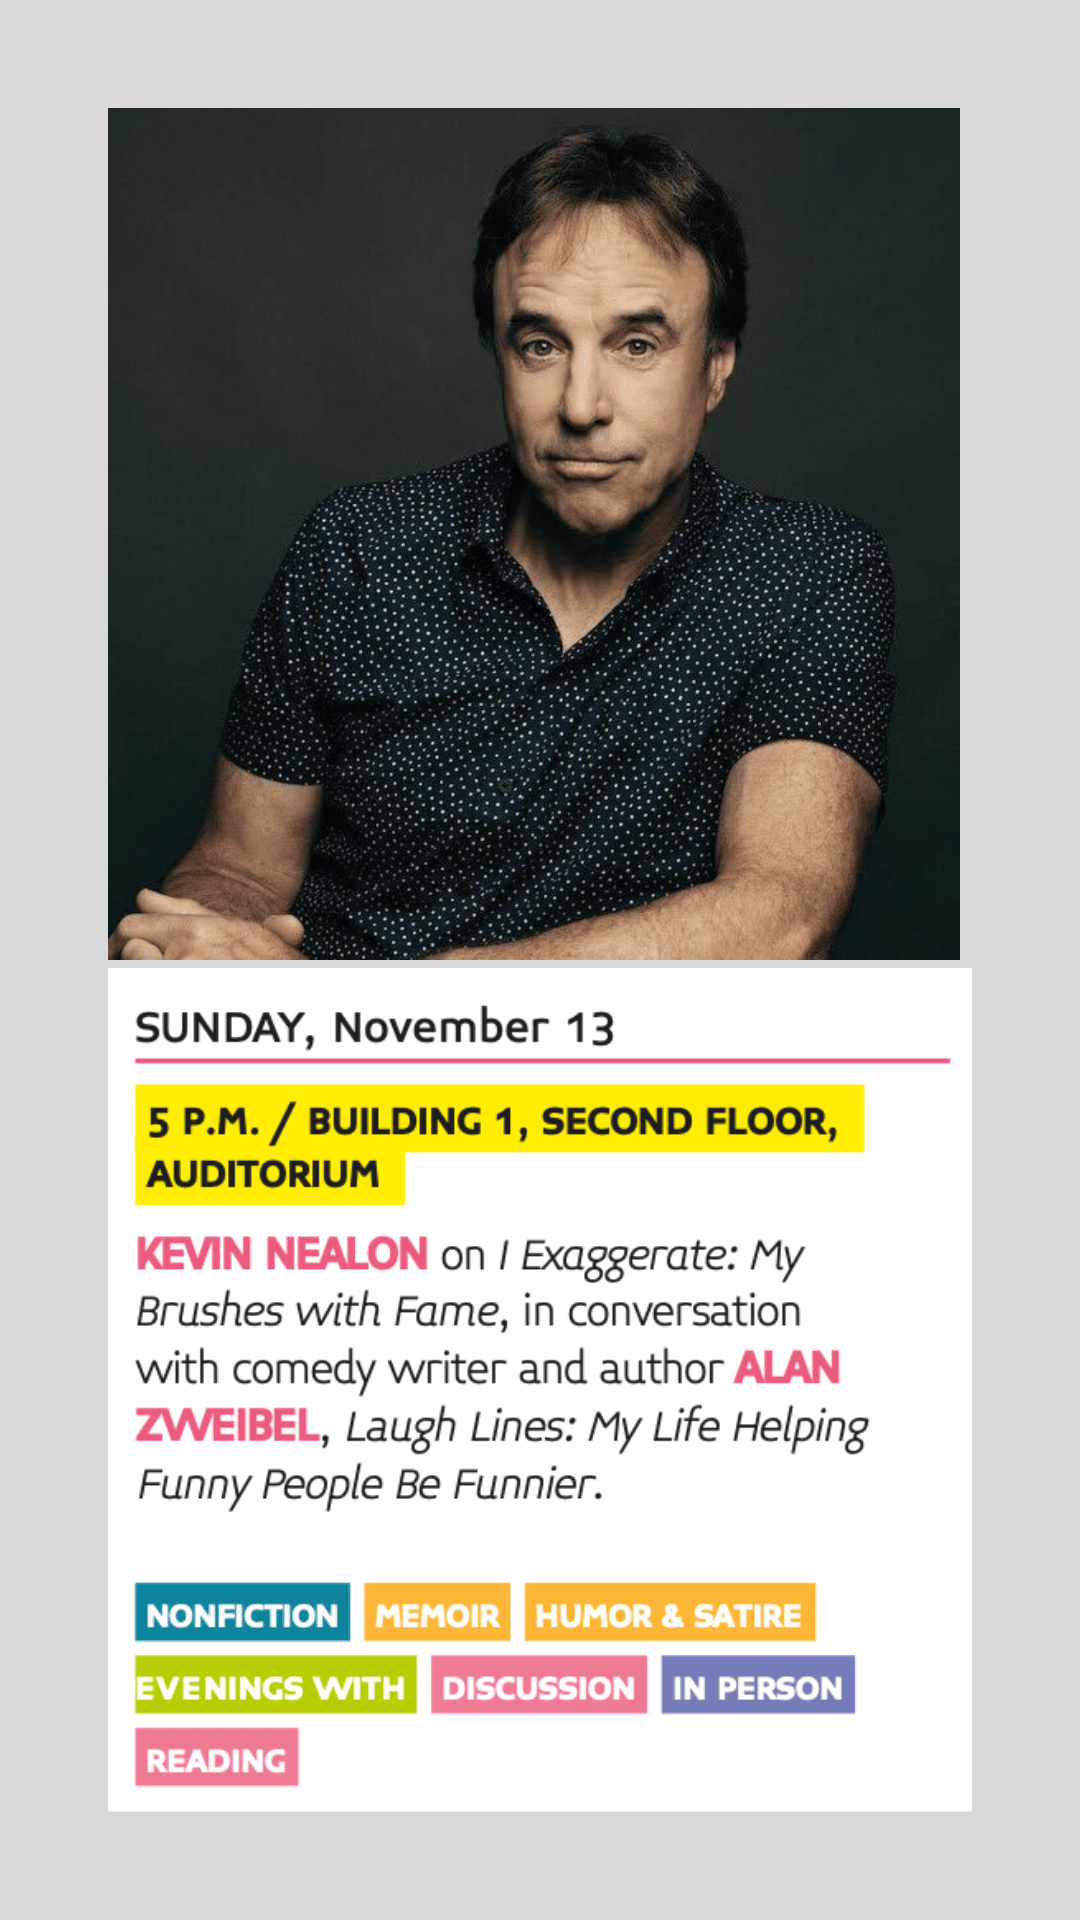 Miami Book Fair 2022 - Kevin Nealon: I exaggerate my brushes with fame